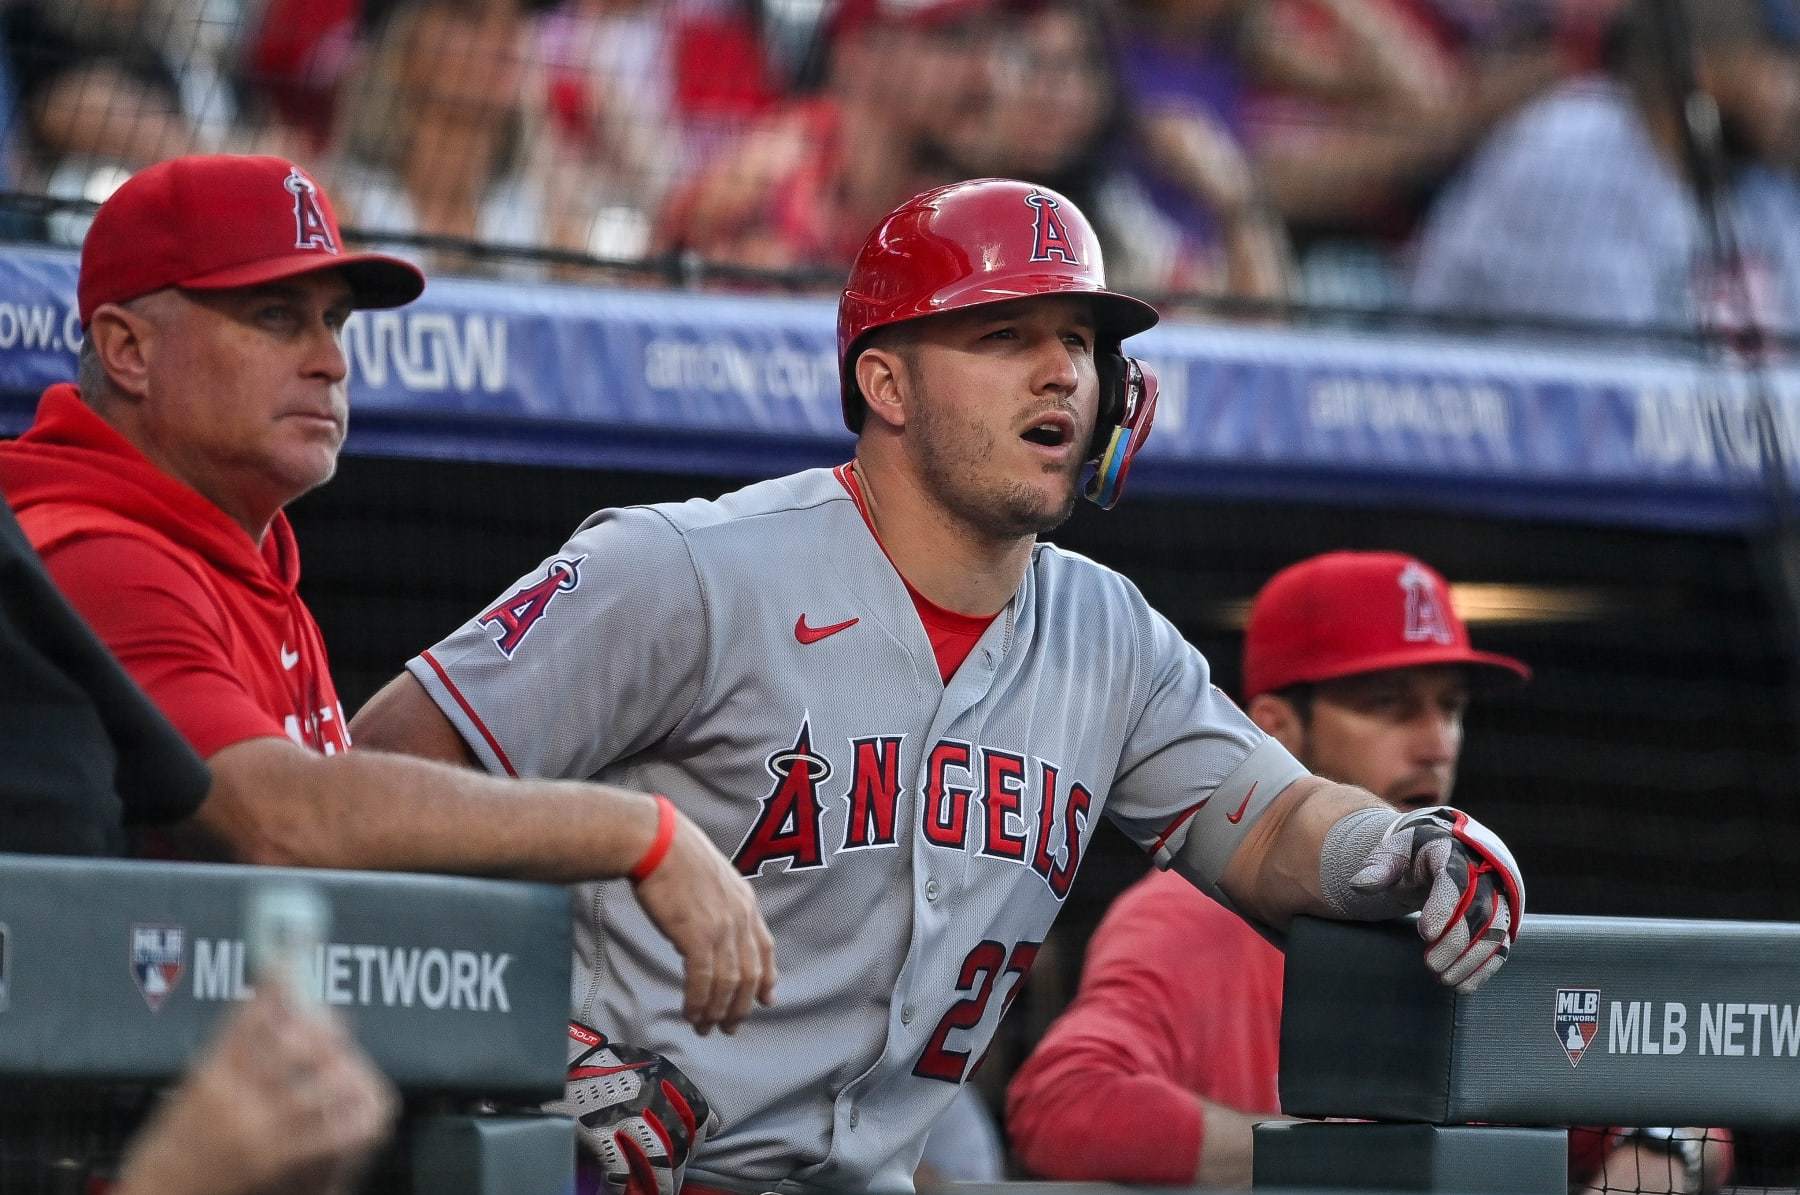 Angels' Mike Trout on cusp of MLB history after 7th straight game